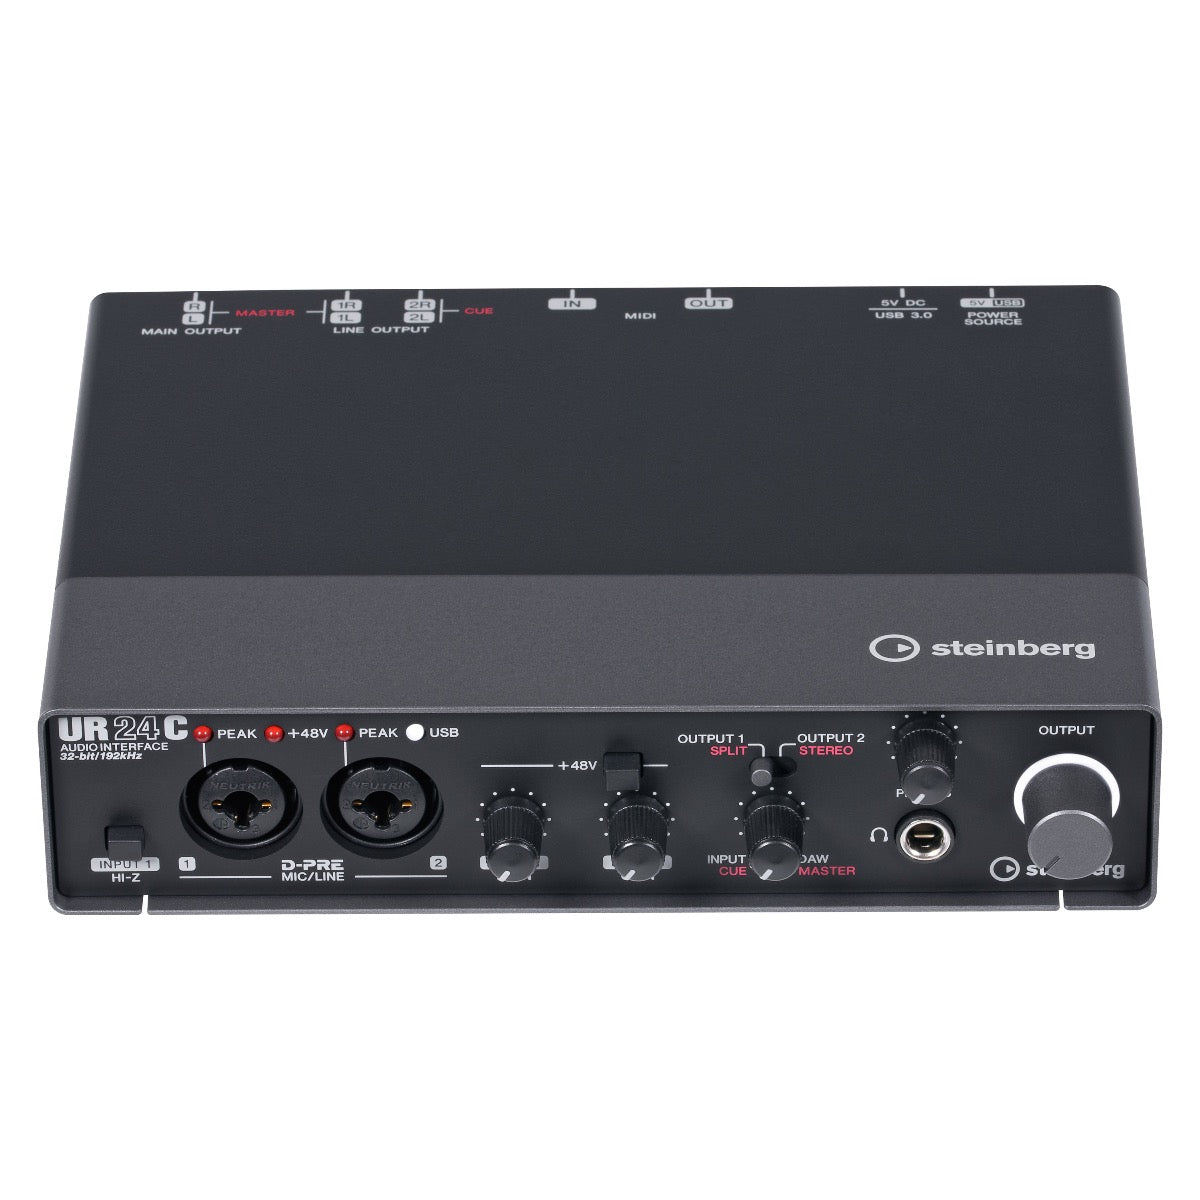 Perspective view of Steinberg UR24C USB Audio Interface showing top and front